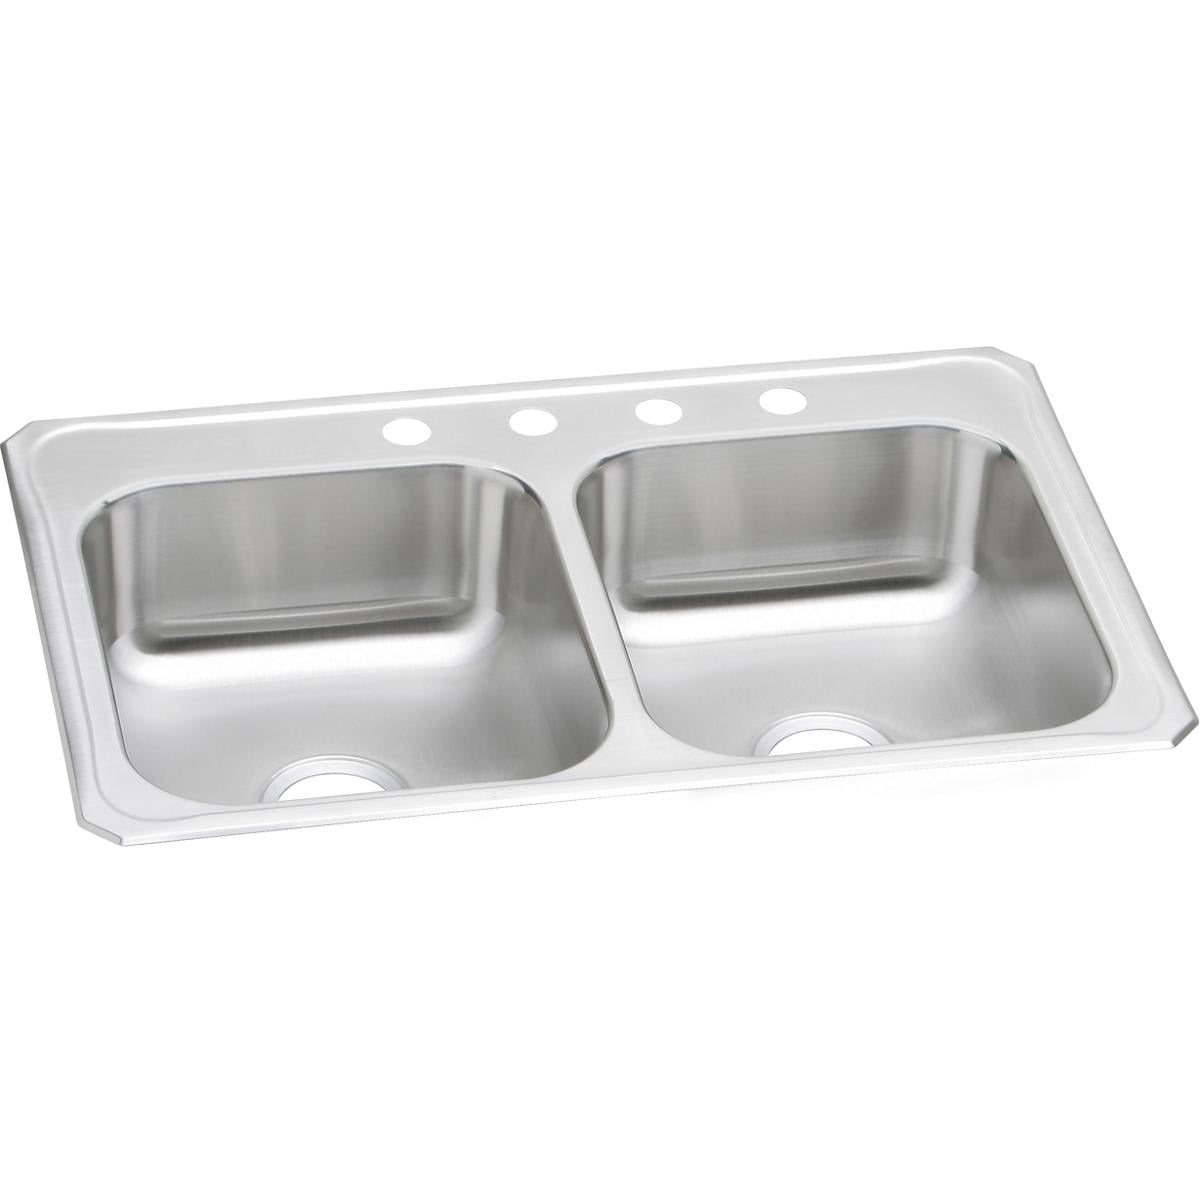 Elkay GE233223 Dayton Equal Double Bowl Top Mount Stainless Steel Sink for sale online